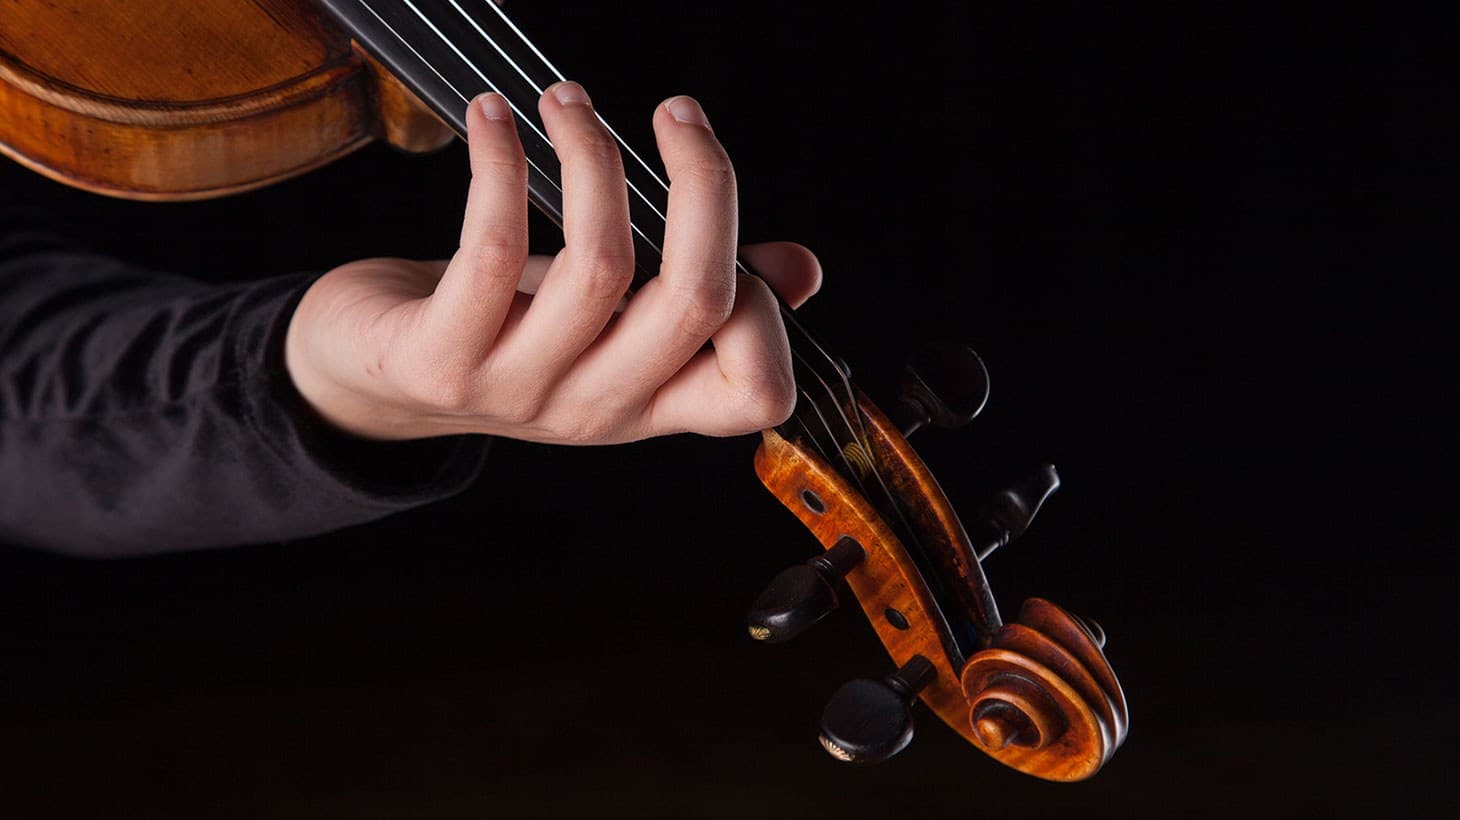 A person's fingers rest on the strings of a violin's neck.